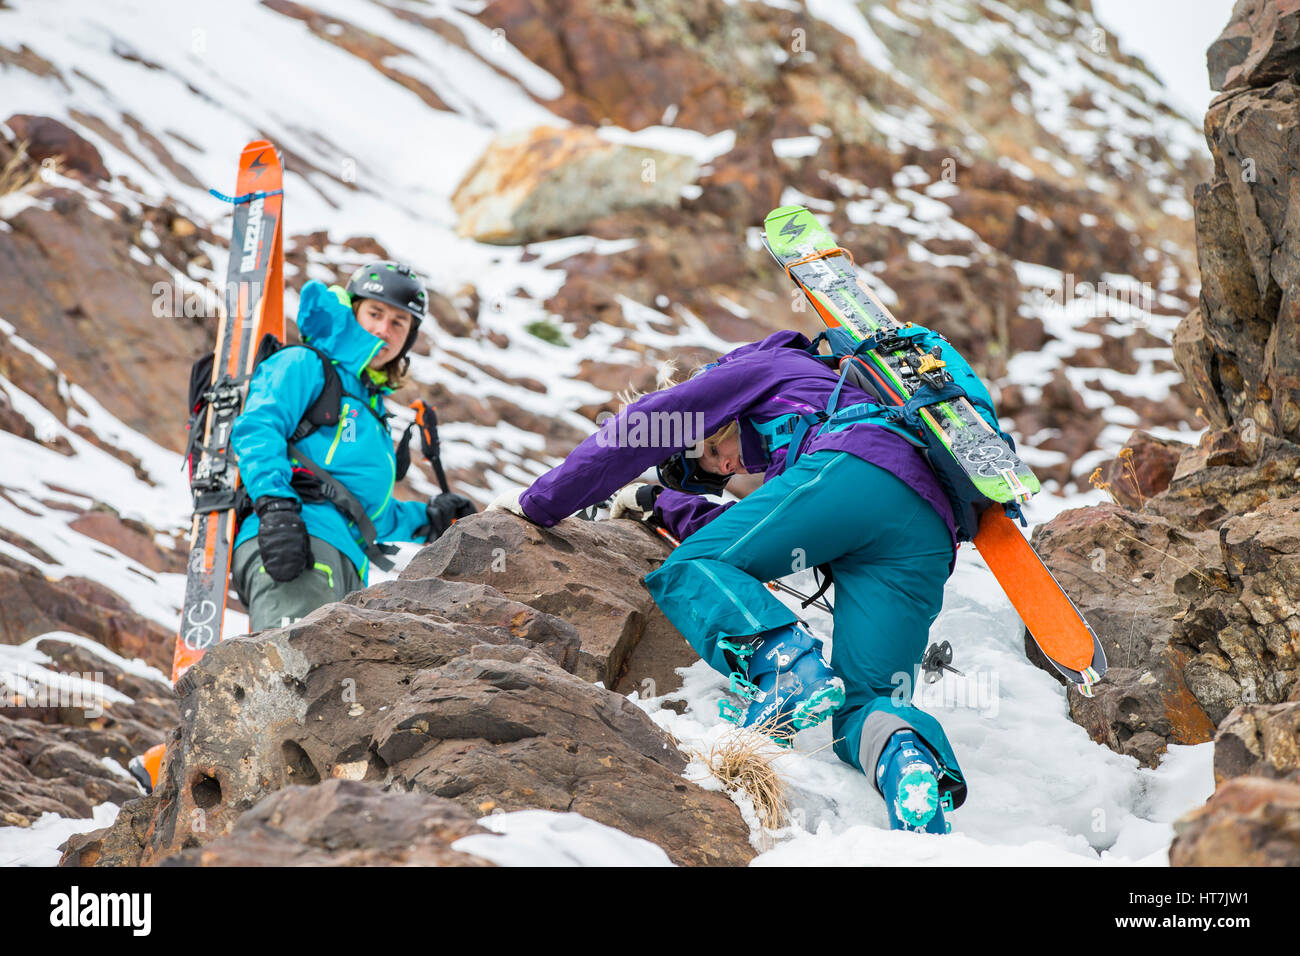 Two Friends Backcountry Skiing In The Wasatch Mountains Stock Photo